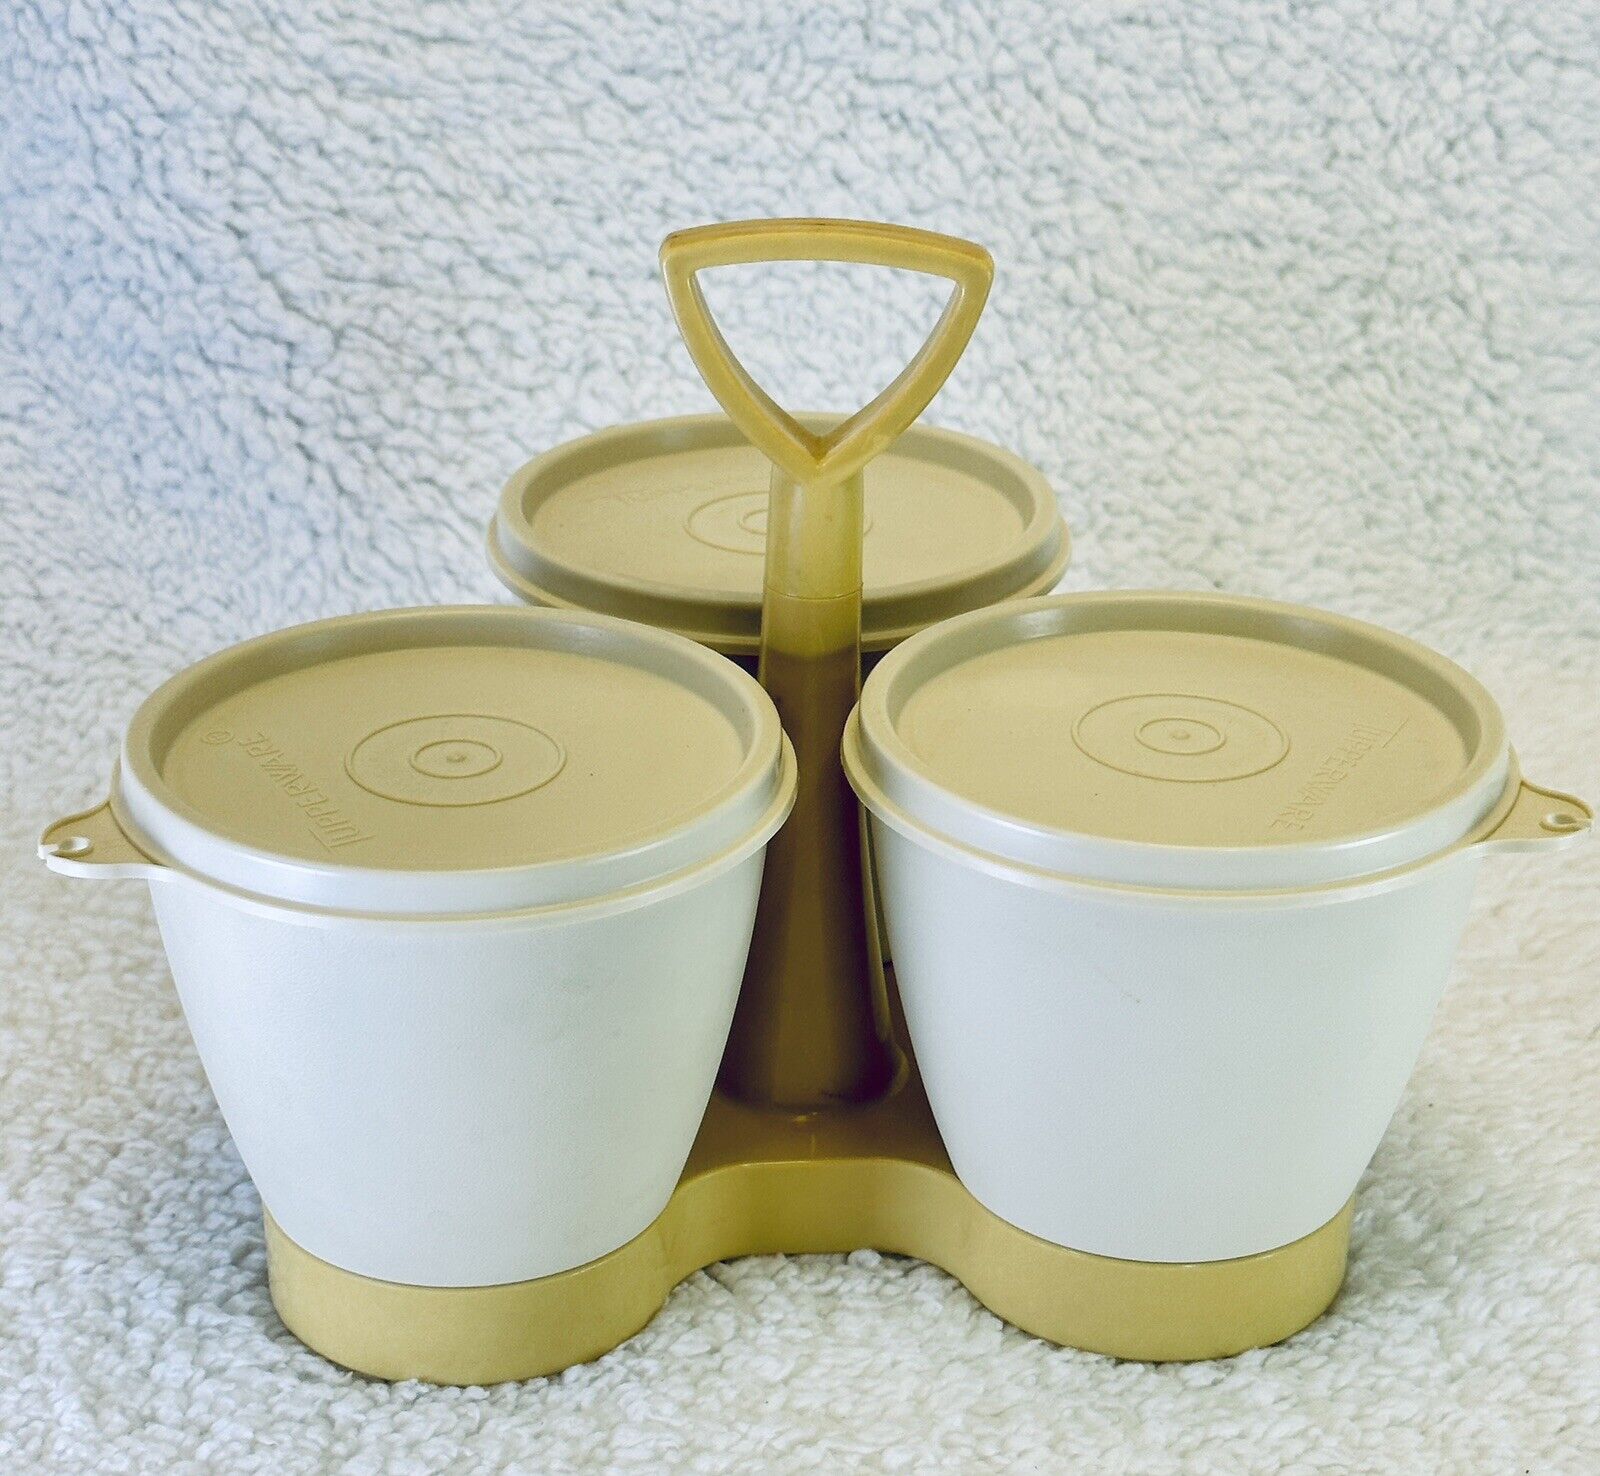 VTG 80s Tupperware Tan Beige Almond CONDIMENT CADDY SET with Lids - NEW